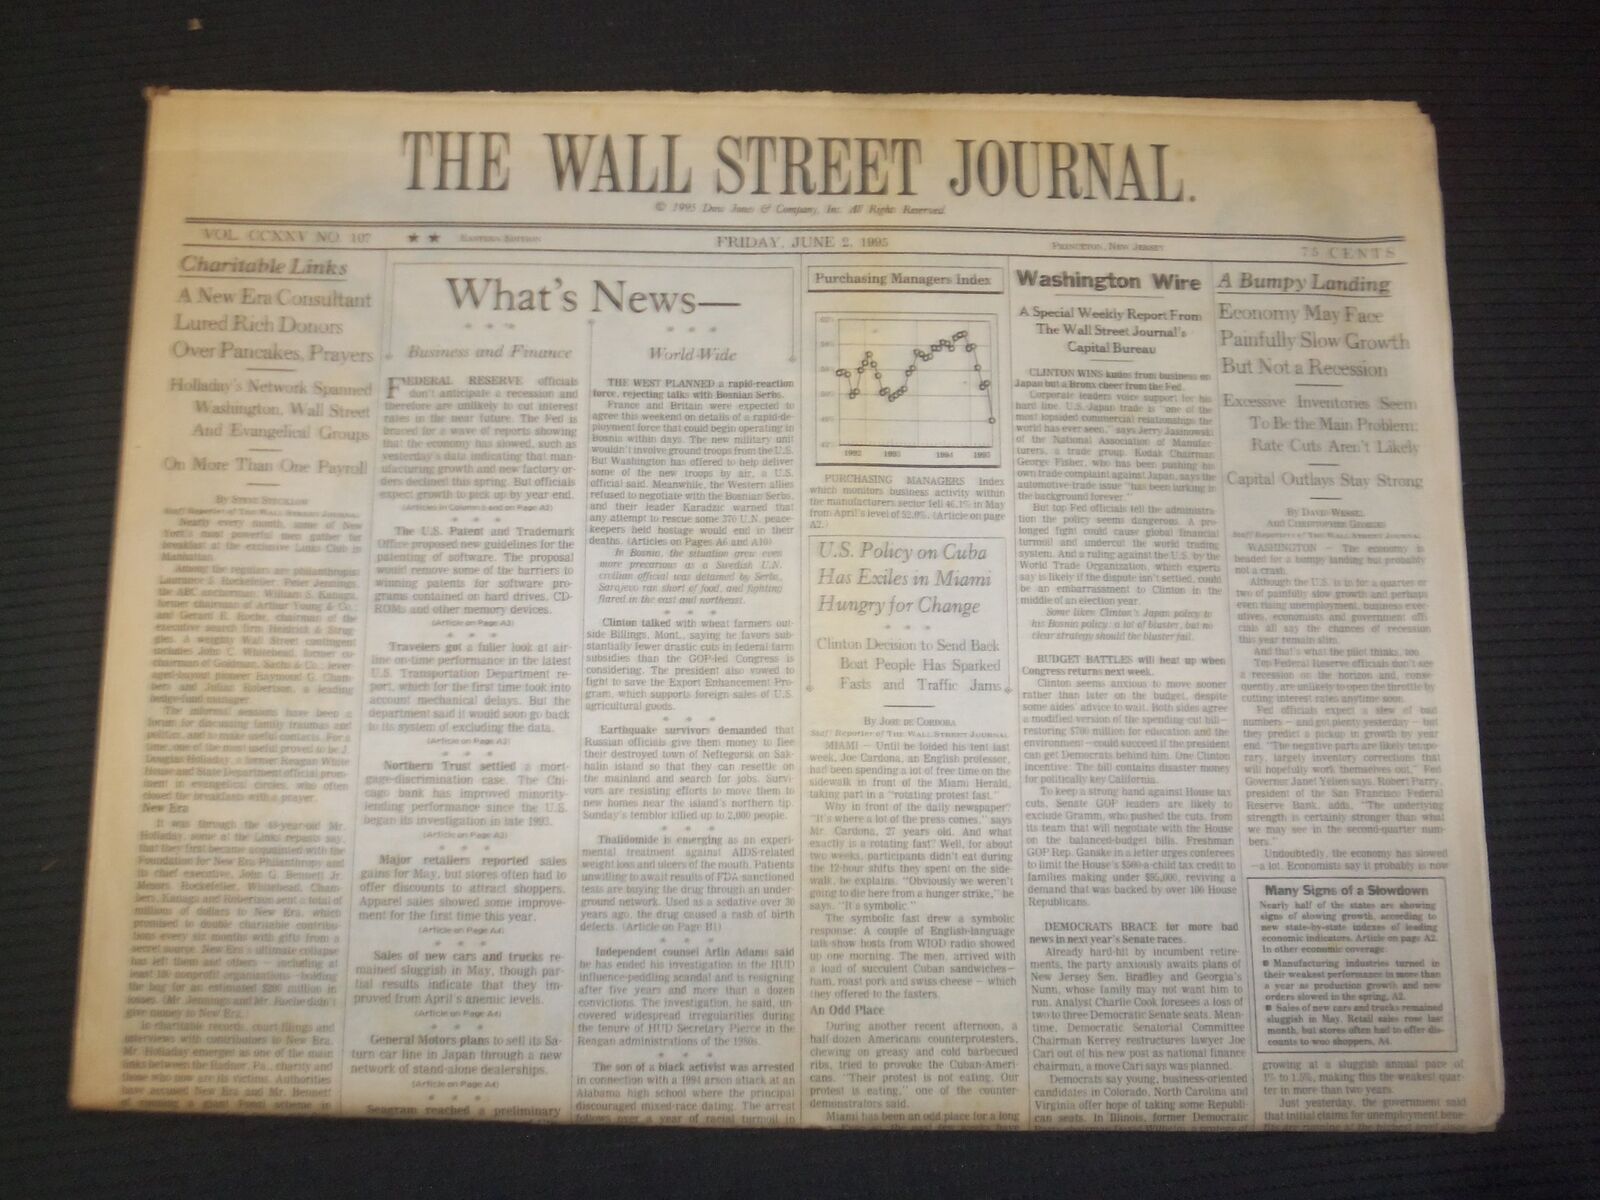 1995 JUNE 2 THE WALL STREET JOURNAL - ECONOMY FACE PAINFULLY SLOW GROWTH- WJ 189